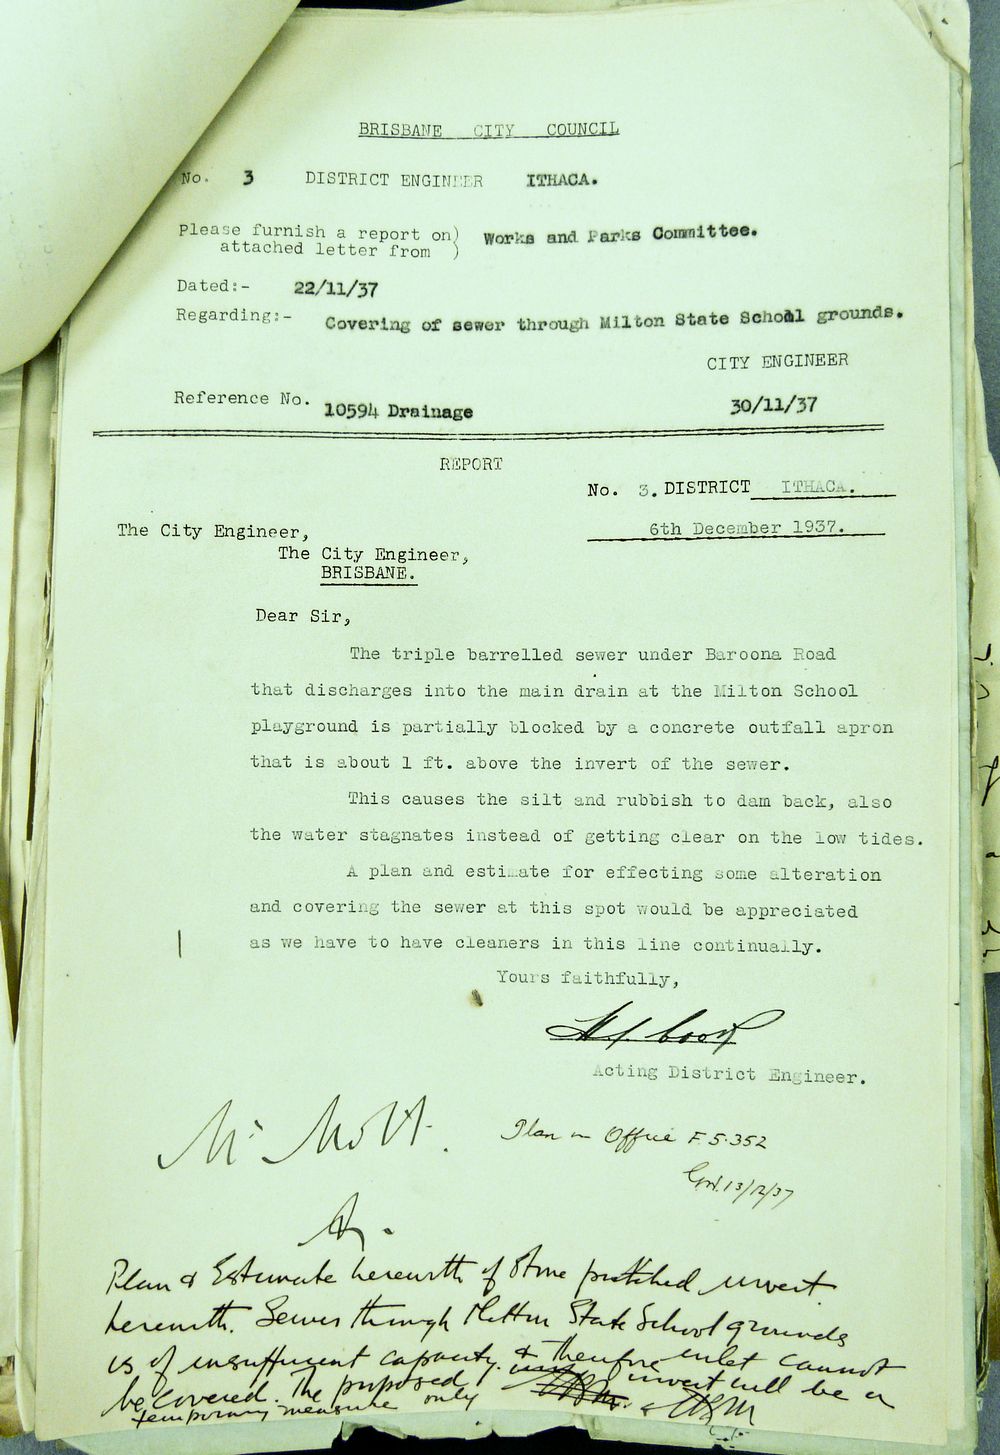 A page from the file held by the Brisbane City Council Archives on the creation of Gregory Park.